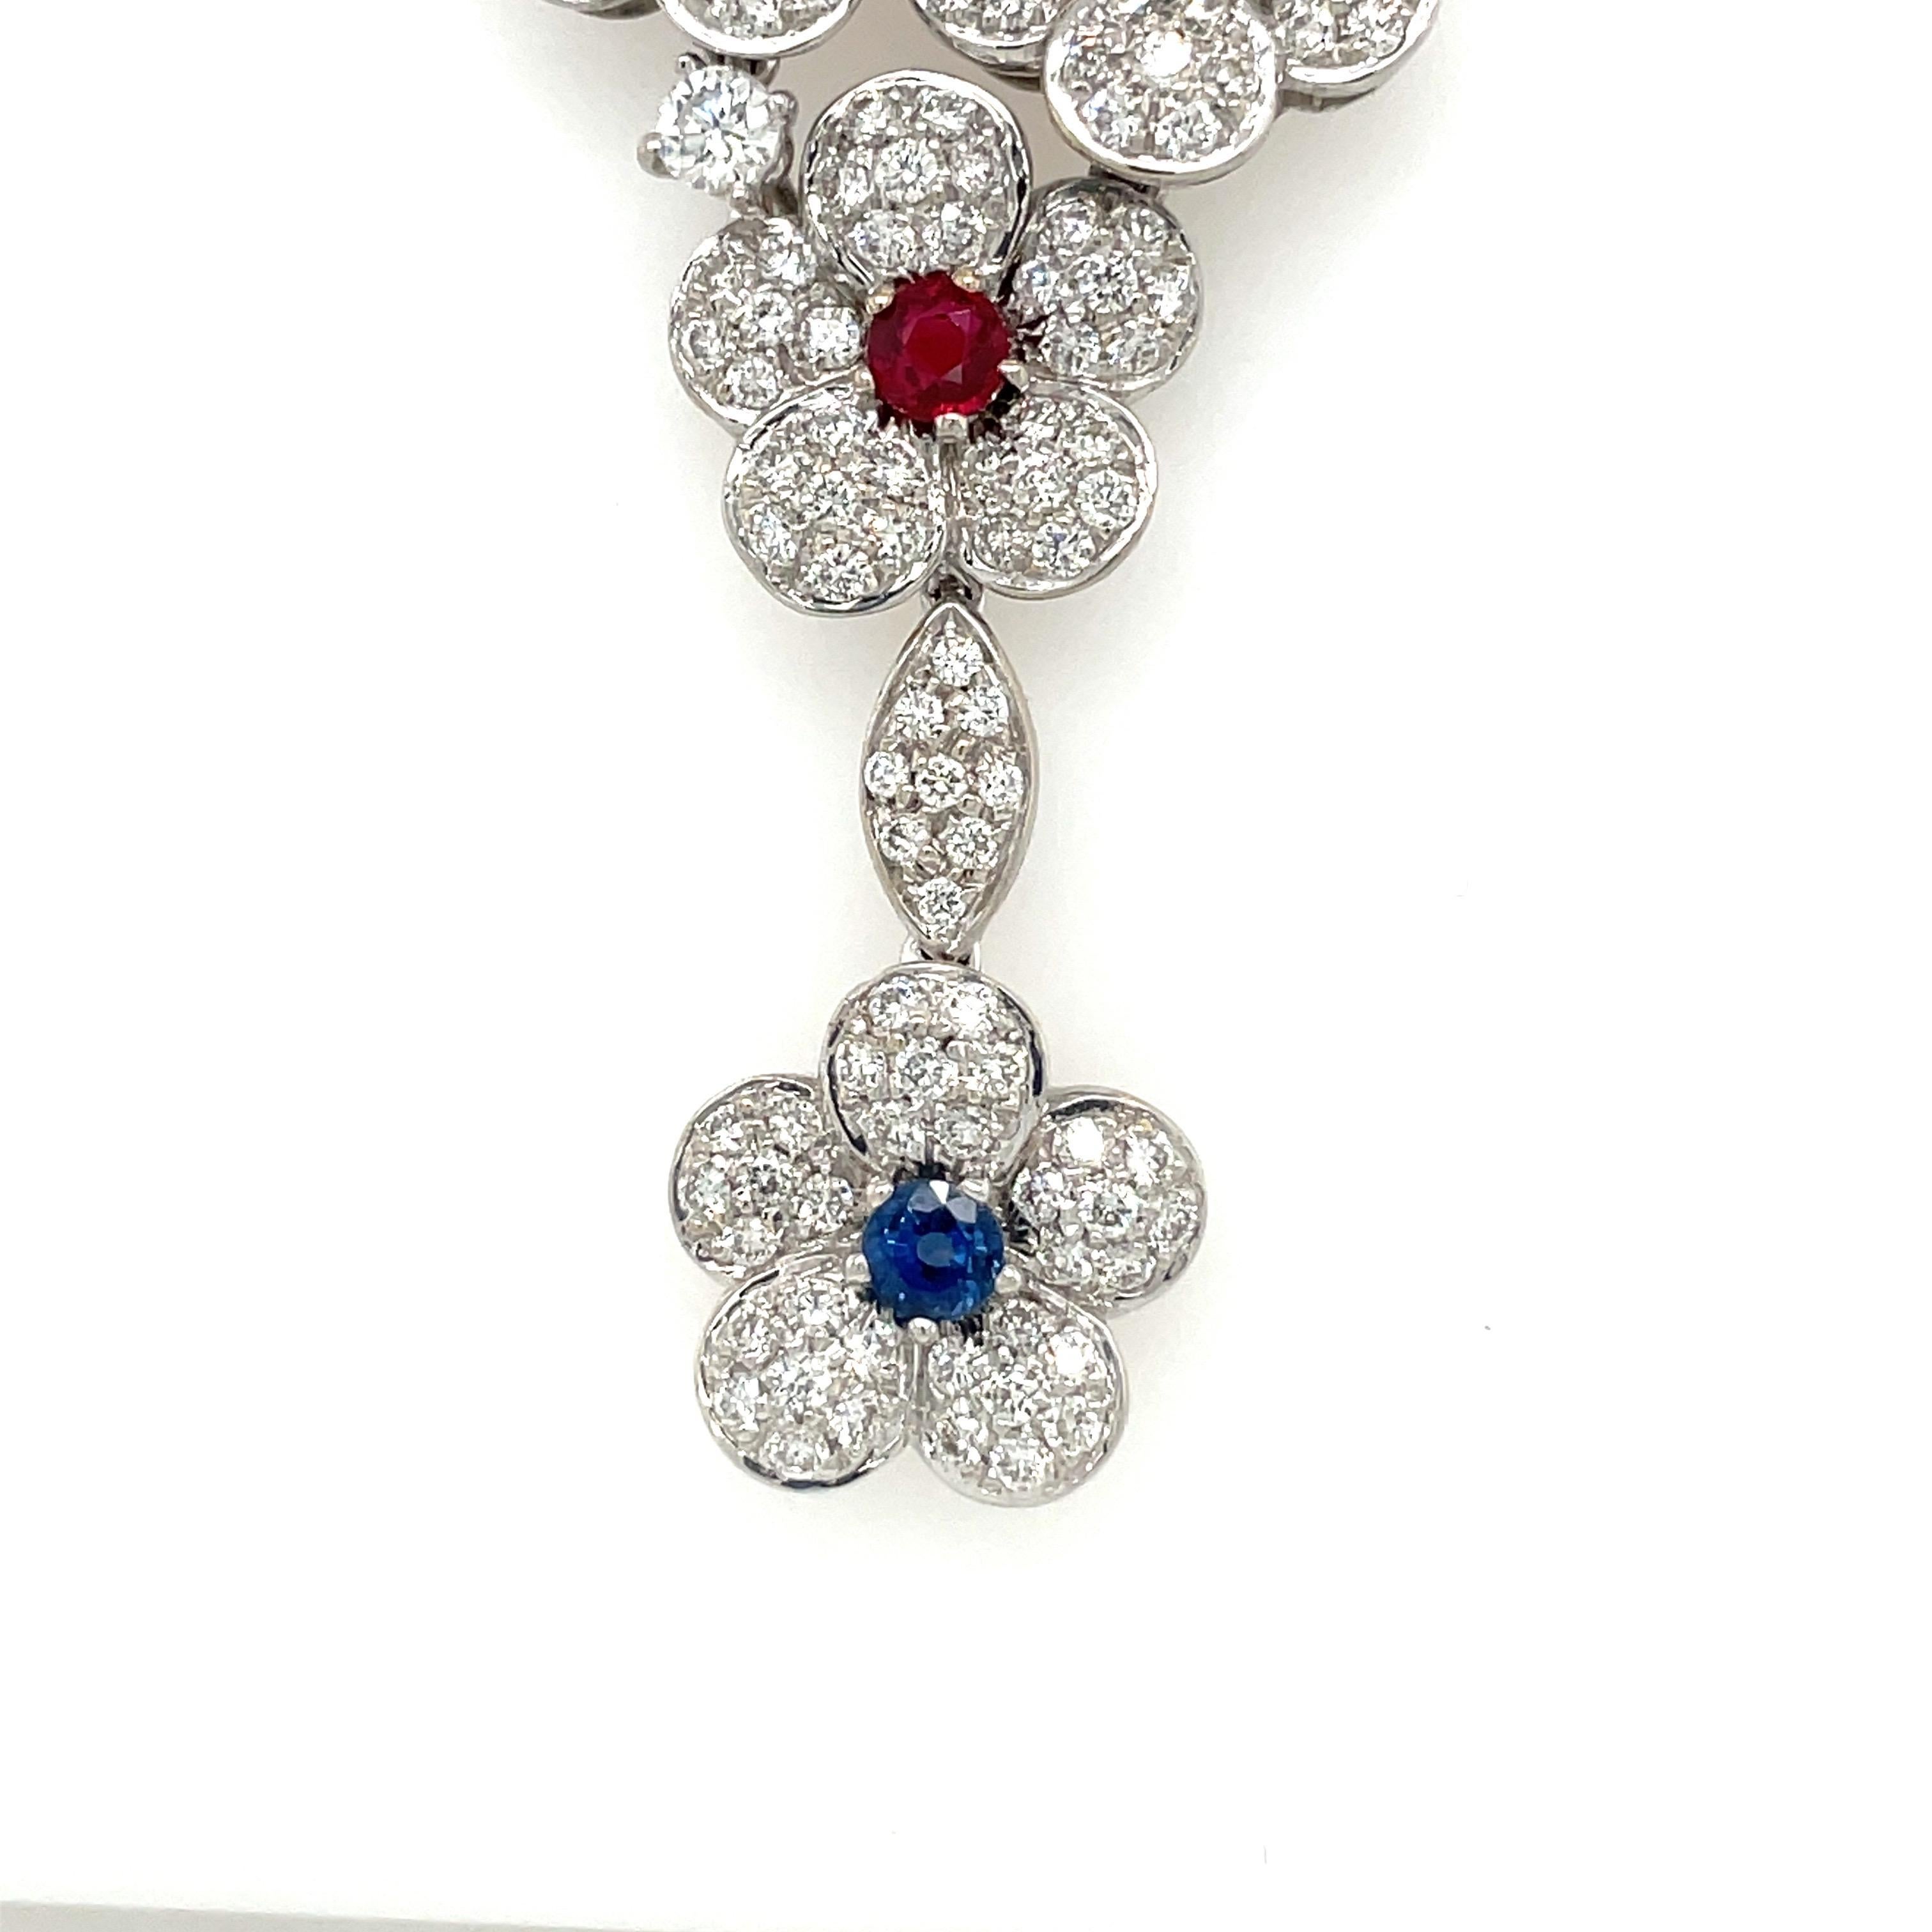 Round Cut Diamond Flower Necklace with Rubies, Emeralds, and Sapphires